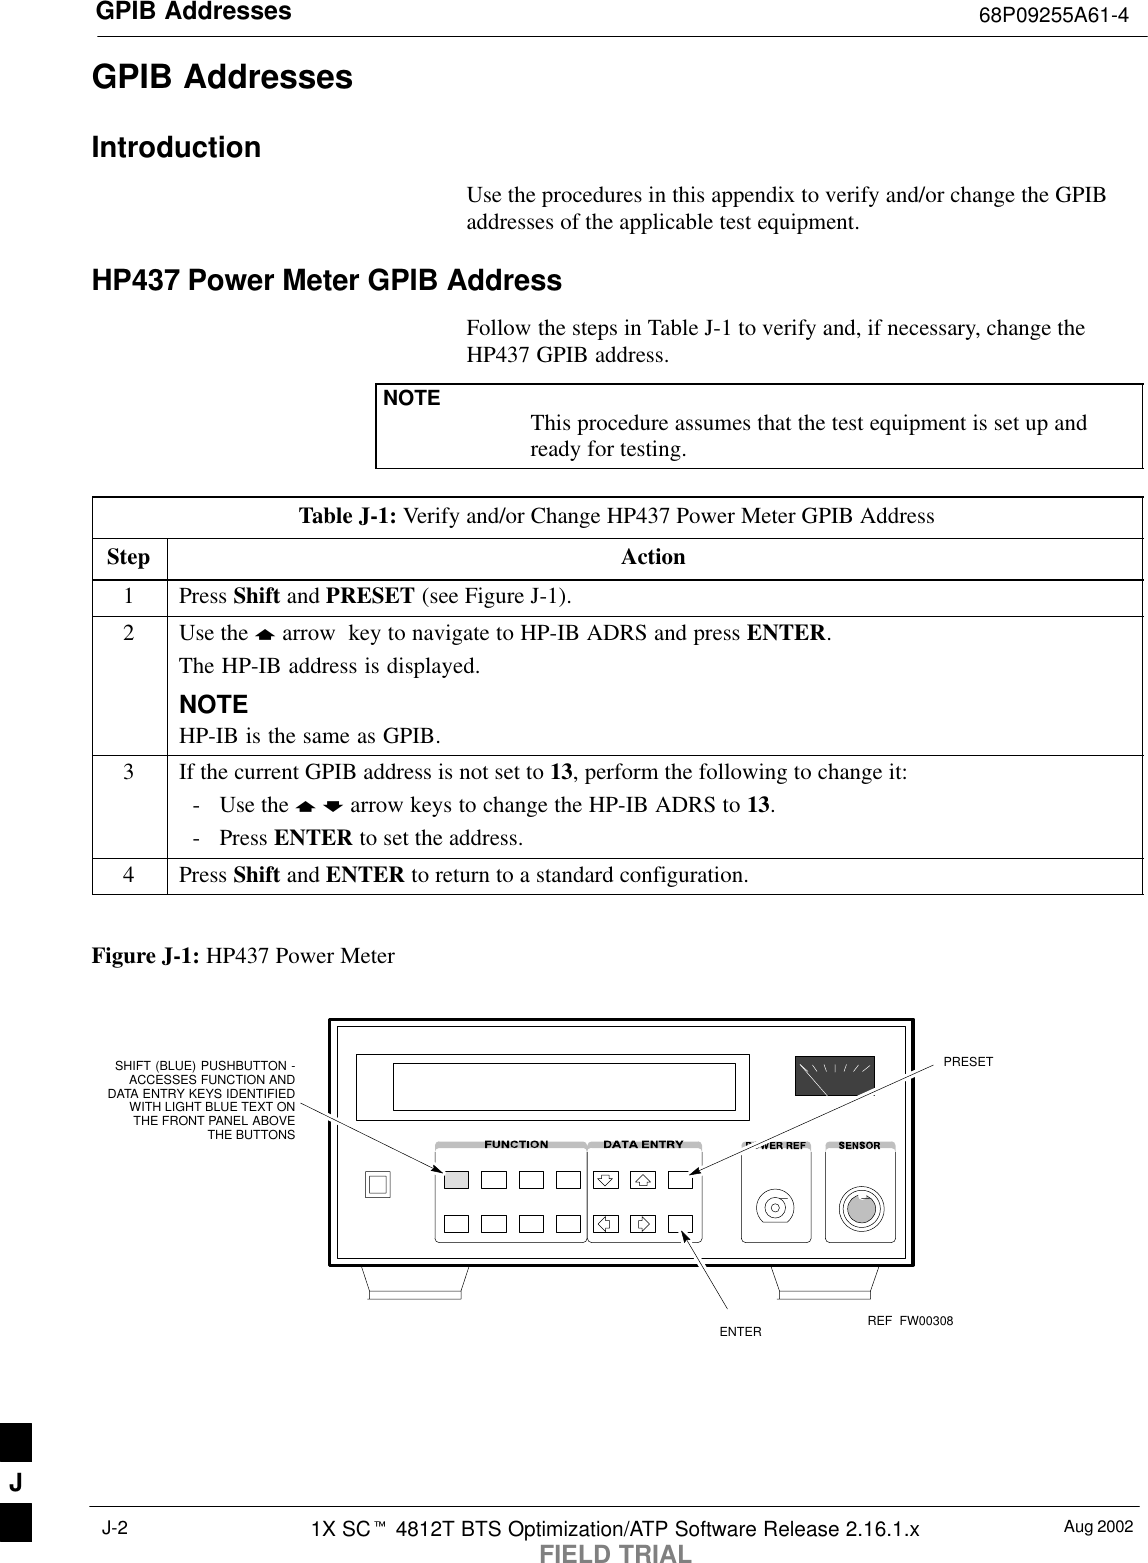 GPIB Addresses 68P09255A61-4Aug 20021X SCt 4812T BTS Optimization/ATP Software Release 2.16.1.xFIELD TRIALJ-2GPIB AddressesIntroductionUse the procedures in this appendix to verify and/or change the GPIBaddresses of the applicable test equipment.HP437 Power Meter GPIB AddressFollow the steps in Table J-1 to verify and, if necessary, change theHP437 GPIB address.NOTE This procedure assumes that the test equipment is set up andready for testing.Table J-1: Verify and/or Change HP437 Power Meter GPIB AddressStep Action1 Press Shift and PRESET (see Figure J-1).2Use the y arrow  key to navigate to HP-IB ADRS and press ENTER.The HP-IB address is displayed.NOTEHP-IB is the same as GPIB.3If the current GPIB address is not set to 13, perform the following to change it:- Use the y b arrow keys to change the HP-IB ADRS to 13.- Press ENTER to set the address.4 Press Shift and ENTER to return to a standard configuration. Figure J-1: HP437 Power MeterENTERPRESETSHIFT (BLUE) PUSHBUTTON -ACCESSES FUNCTION ANDDATA ENTRY KEYS IDENTIFIEDWITH LIGHT BLUE TEXT ONTHE FRONT PANEL ABOVETHE BUTTONSFW00308REFJ